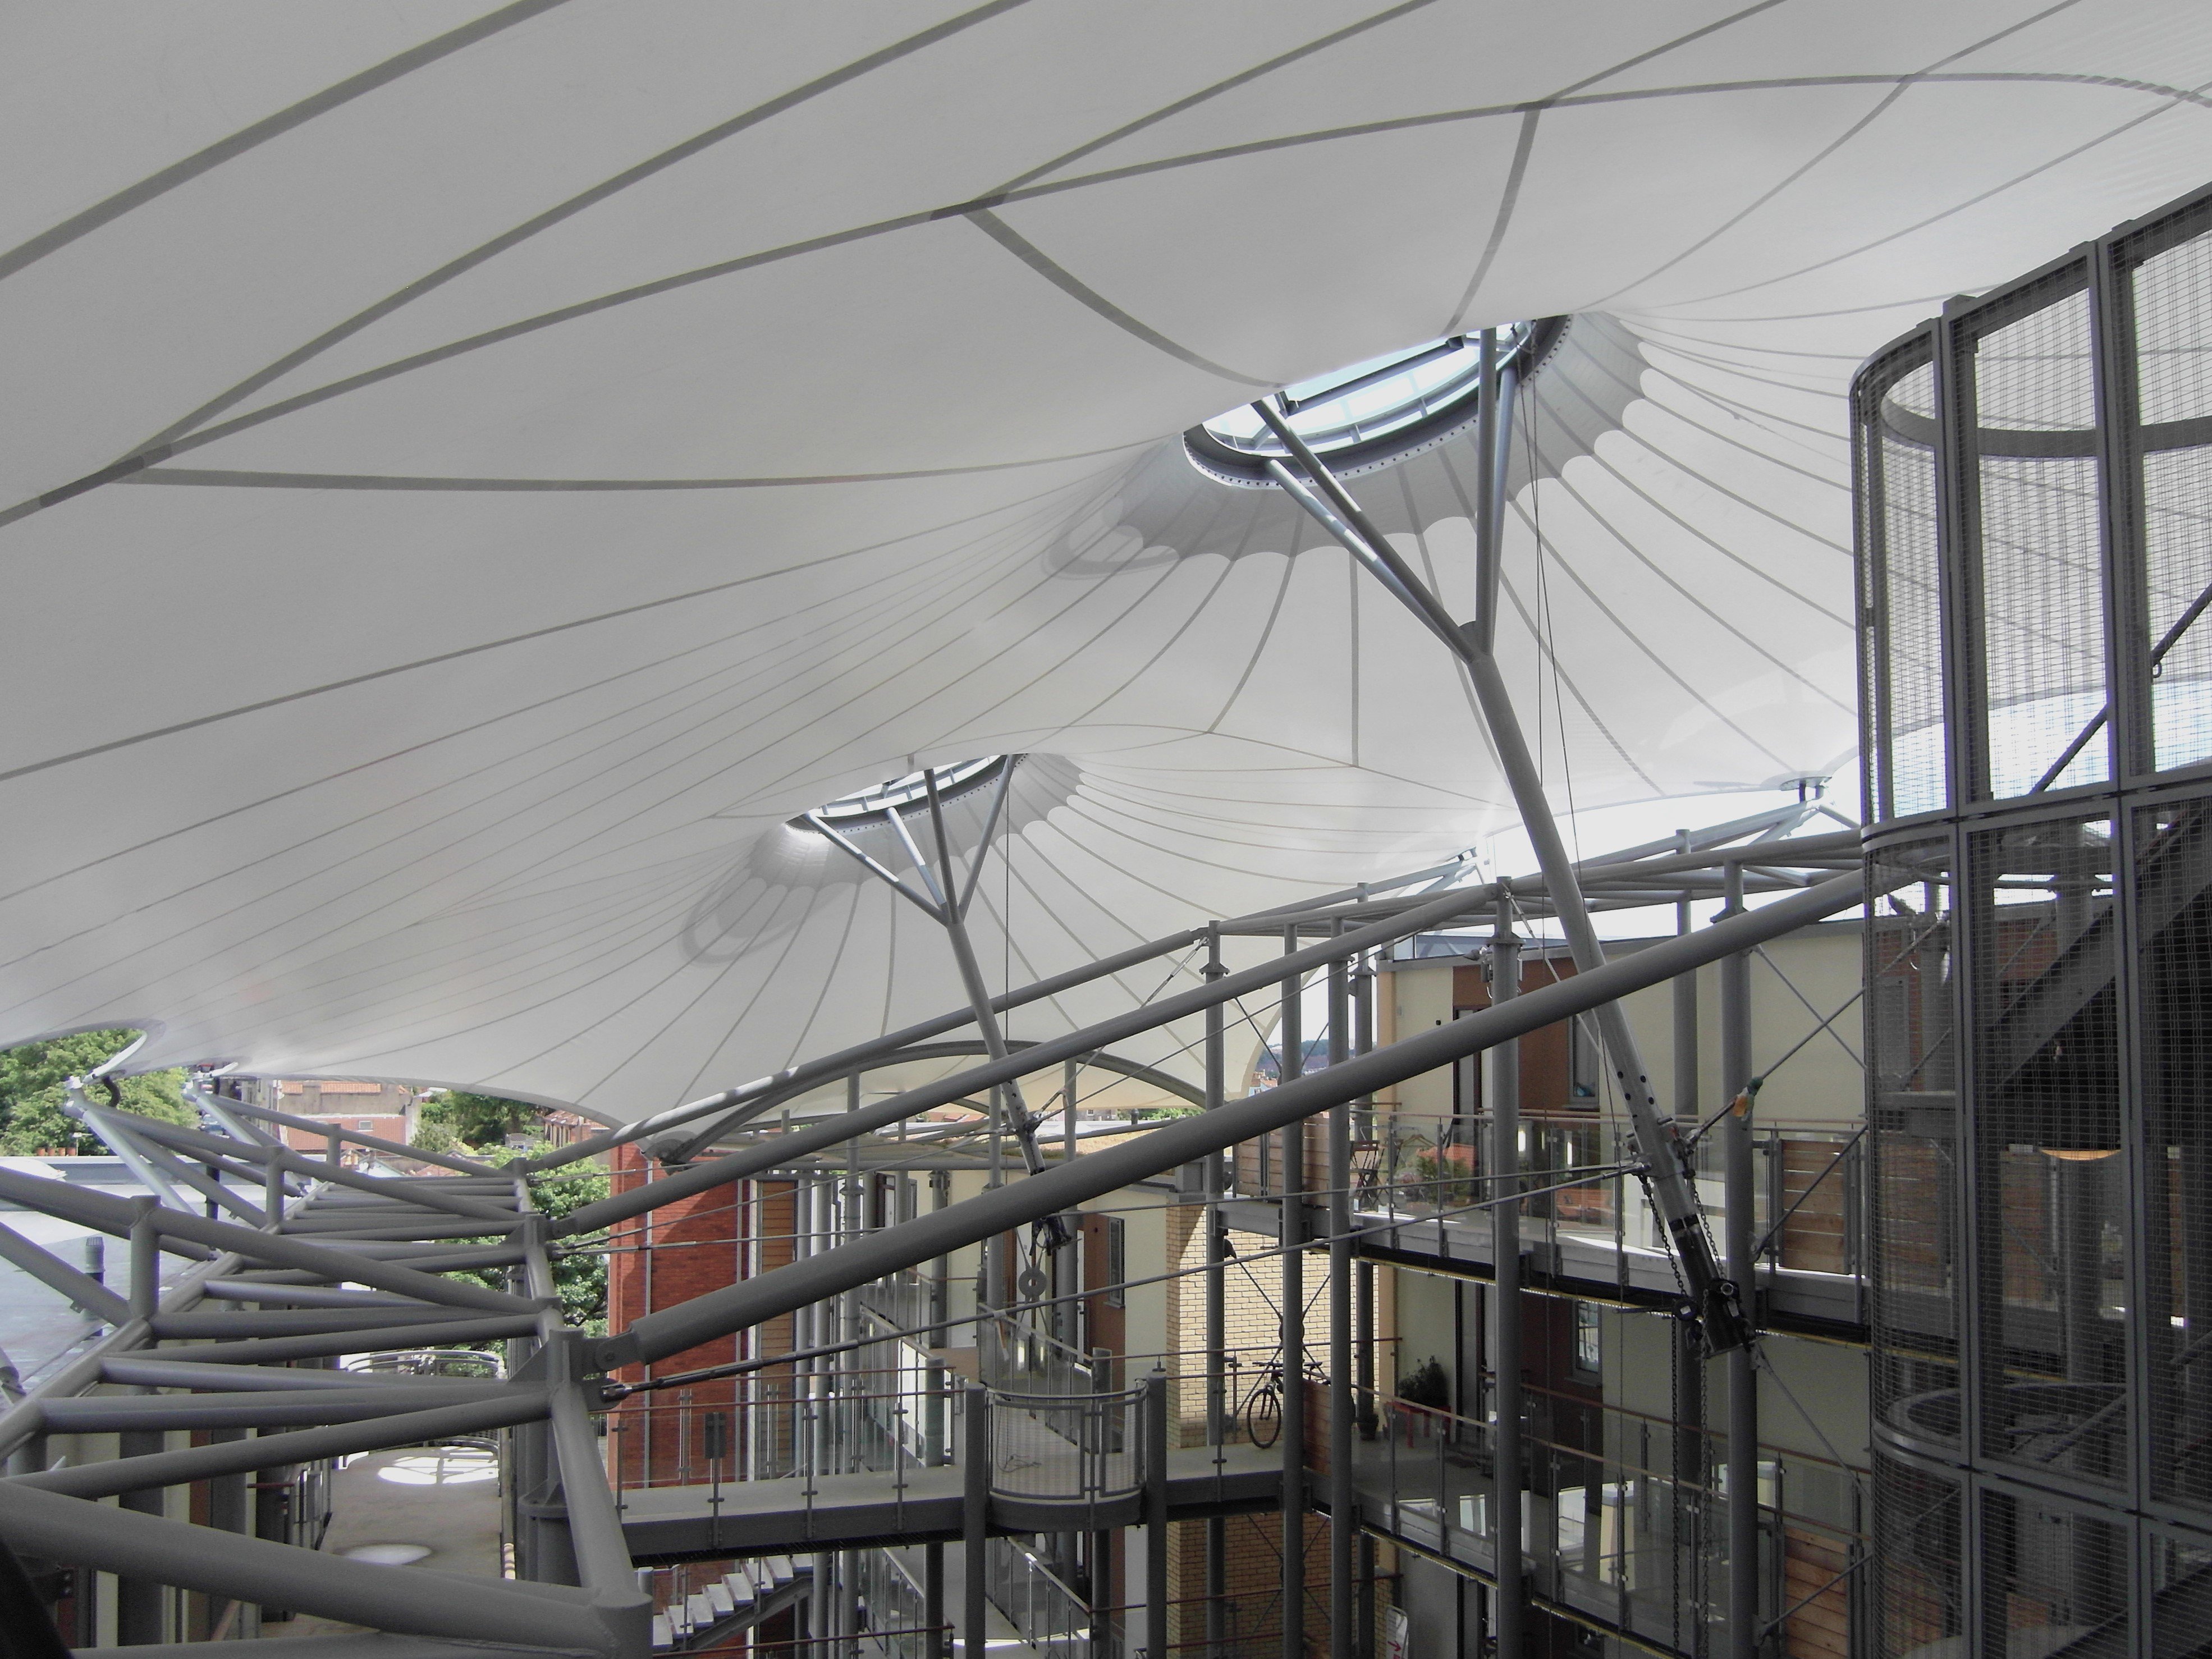 The underside of the tensile fabric structure within Dovercourt engineered by Fenton Holloway using form finding. 